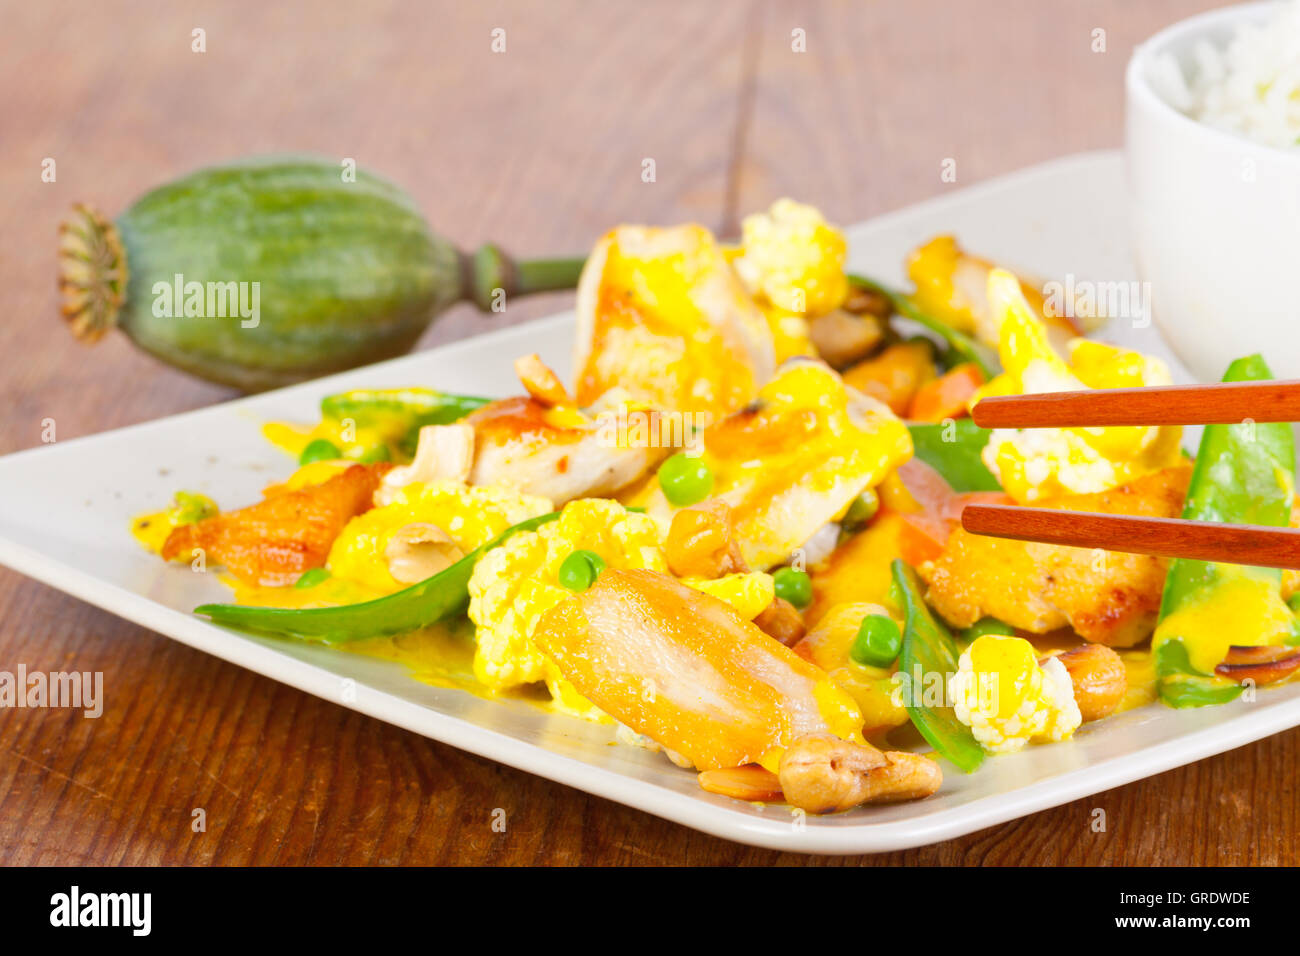 Chicken Fillet With Peas, Beans And Vegetable Rice Stock Photo